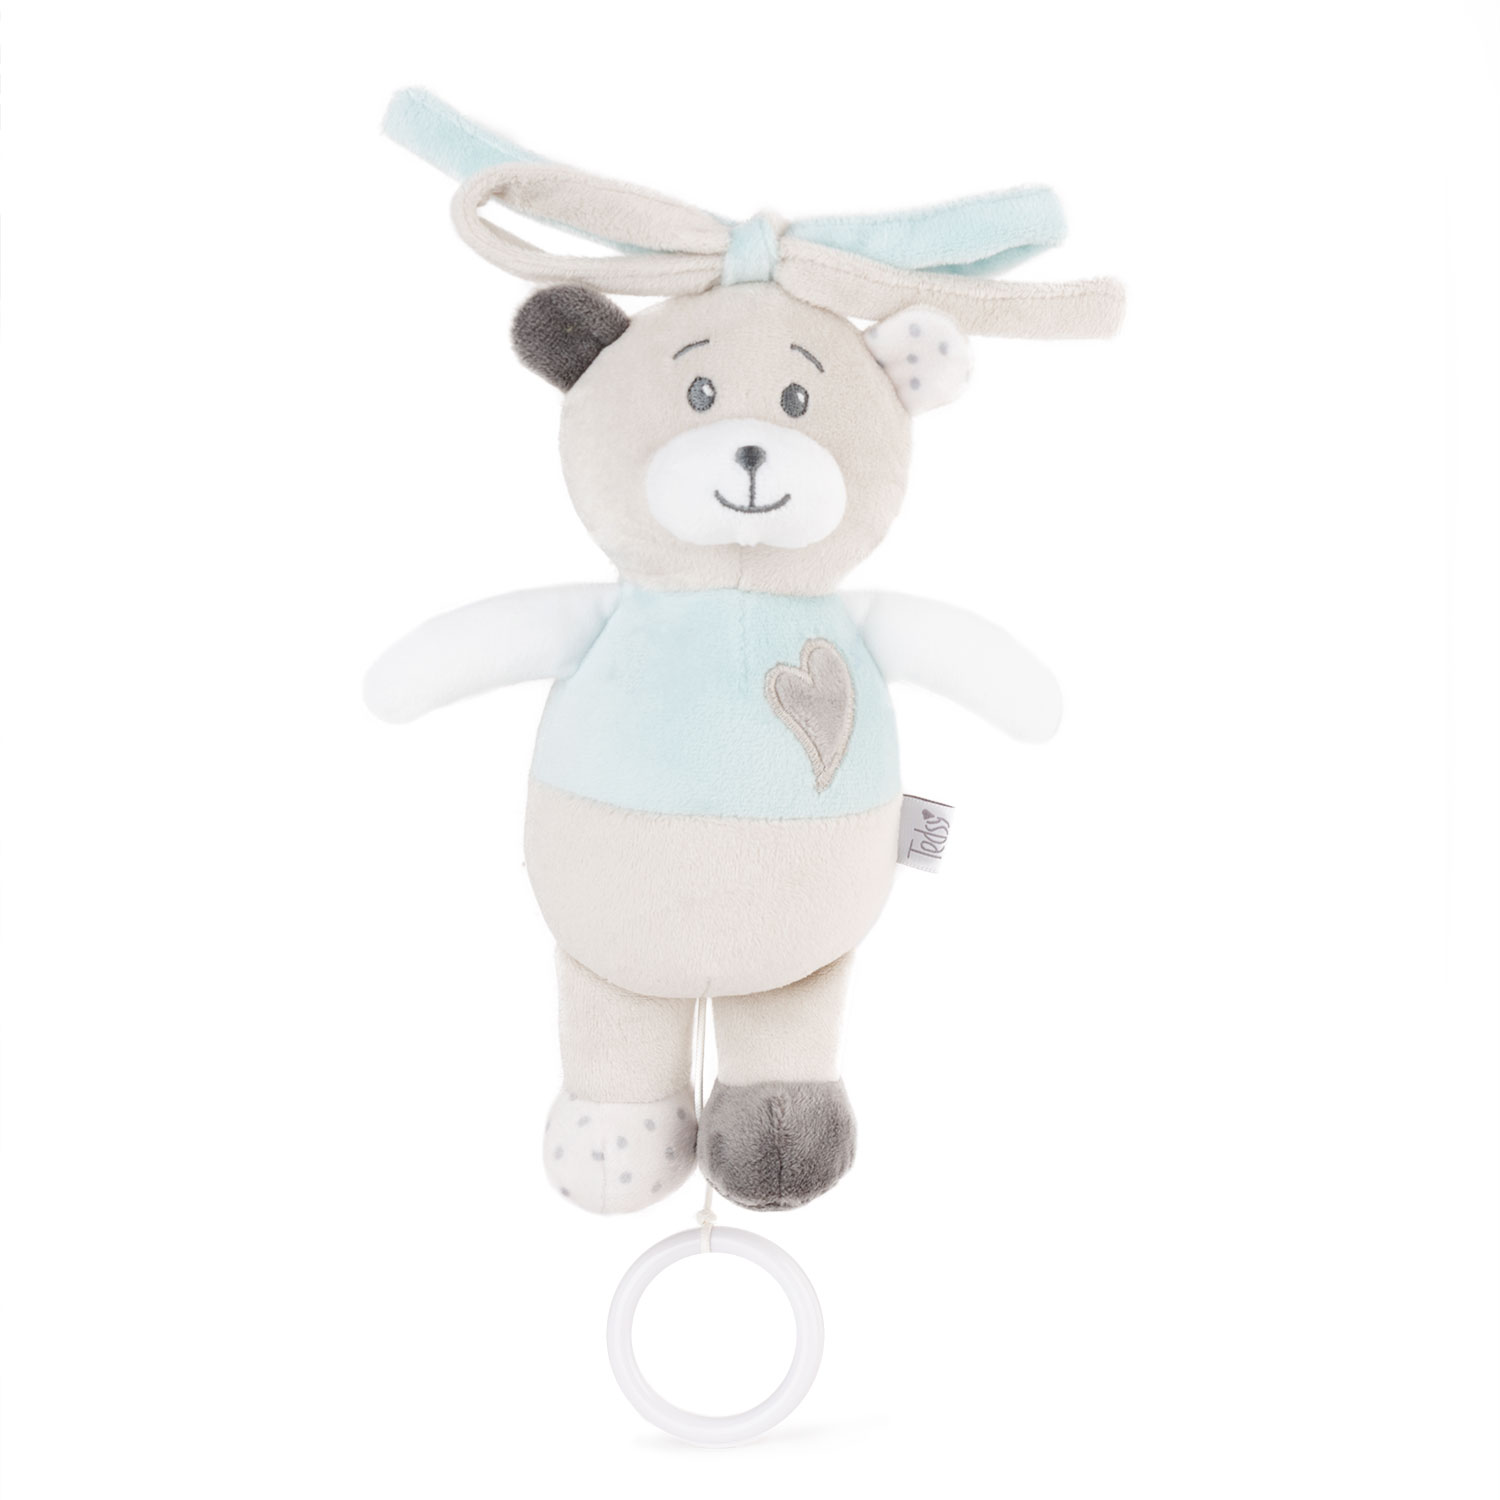 Baby Musical toy bear - Blue